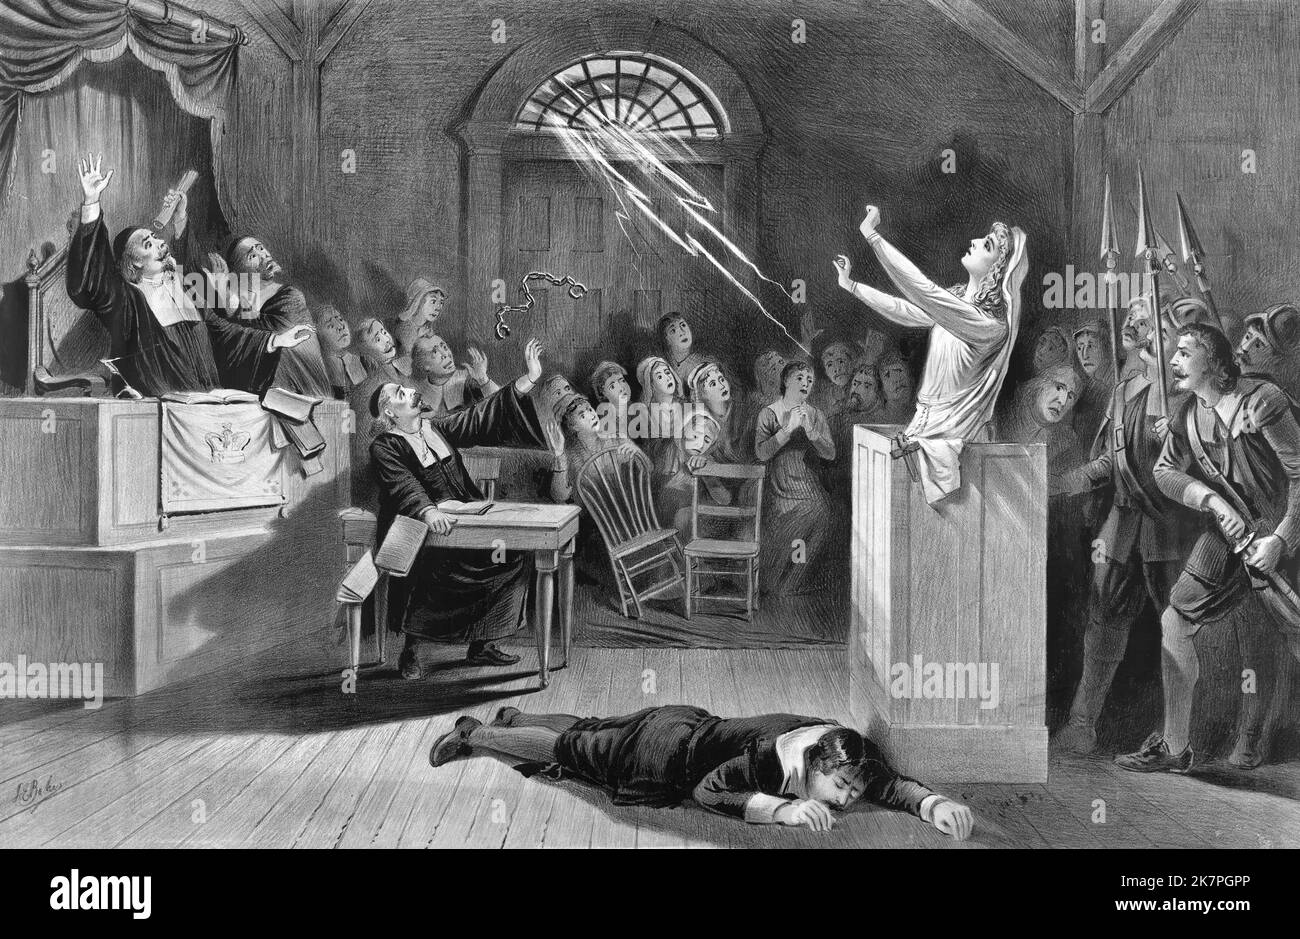 Witchcraft trial depiction, Witchcraft traditionally means the use of magic or supernatural powers to harm others. A practitioner is a witch. Stock Photo